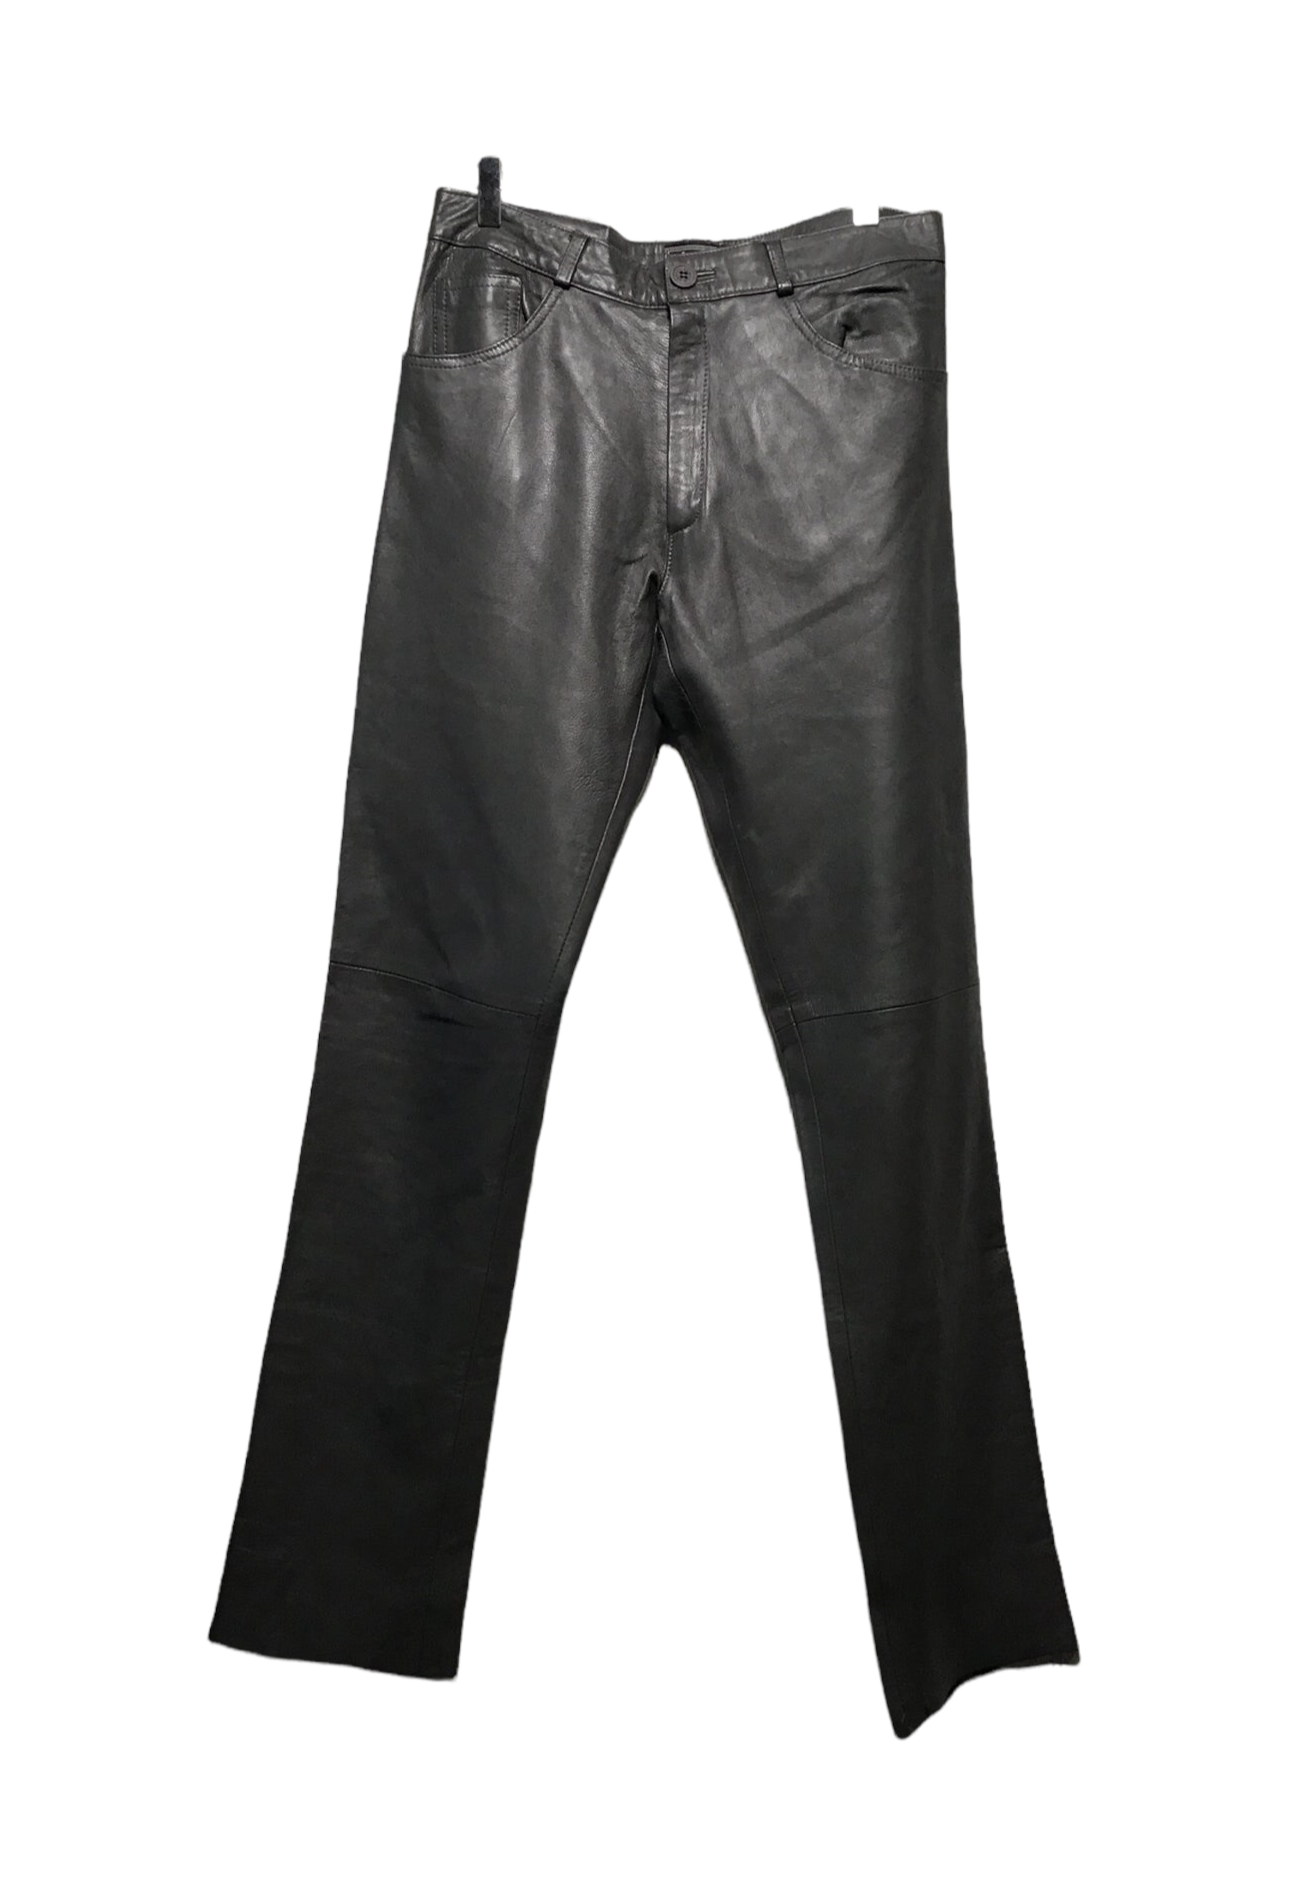 Women’s Leather Trousers (Size M)